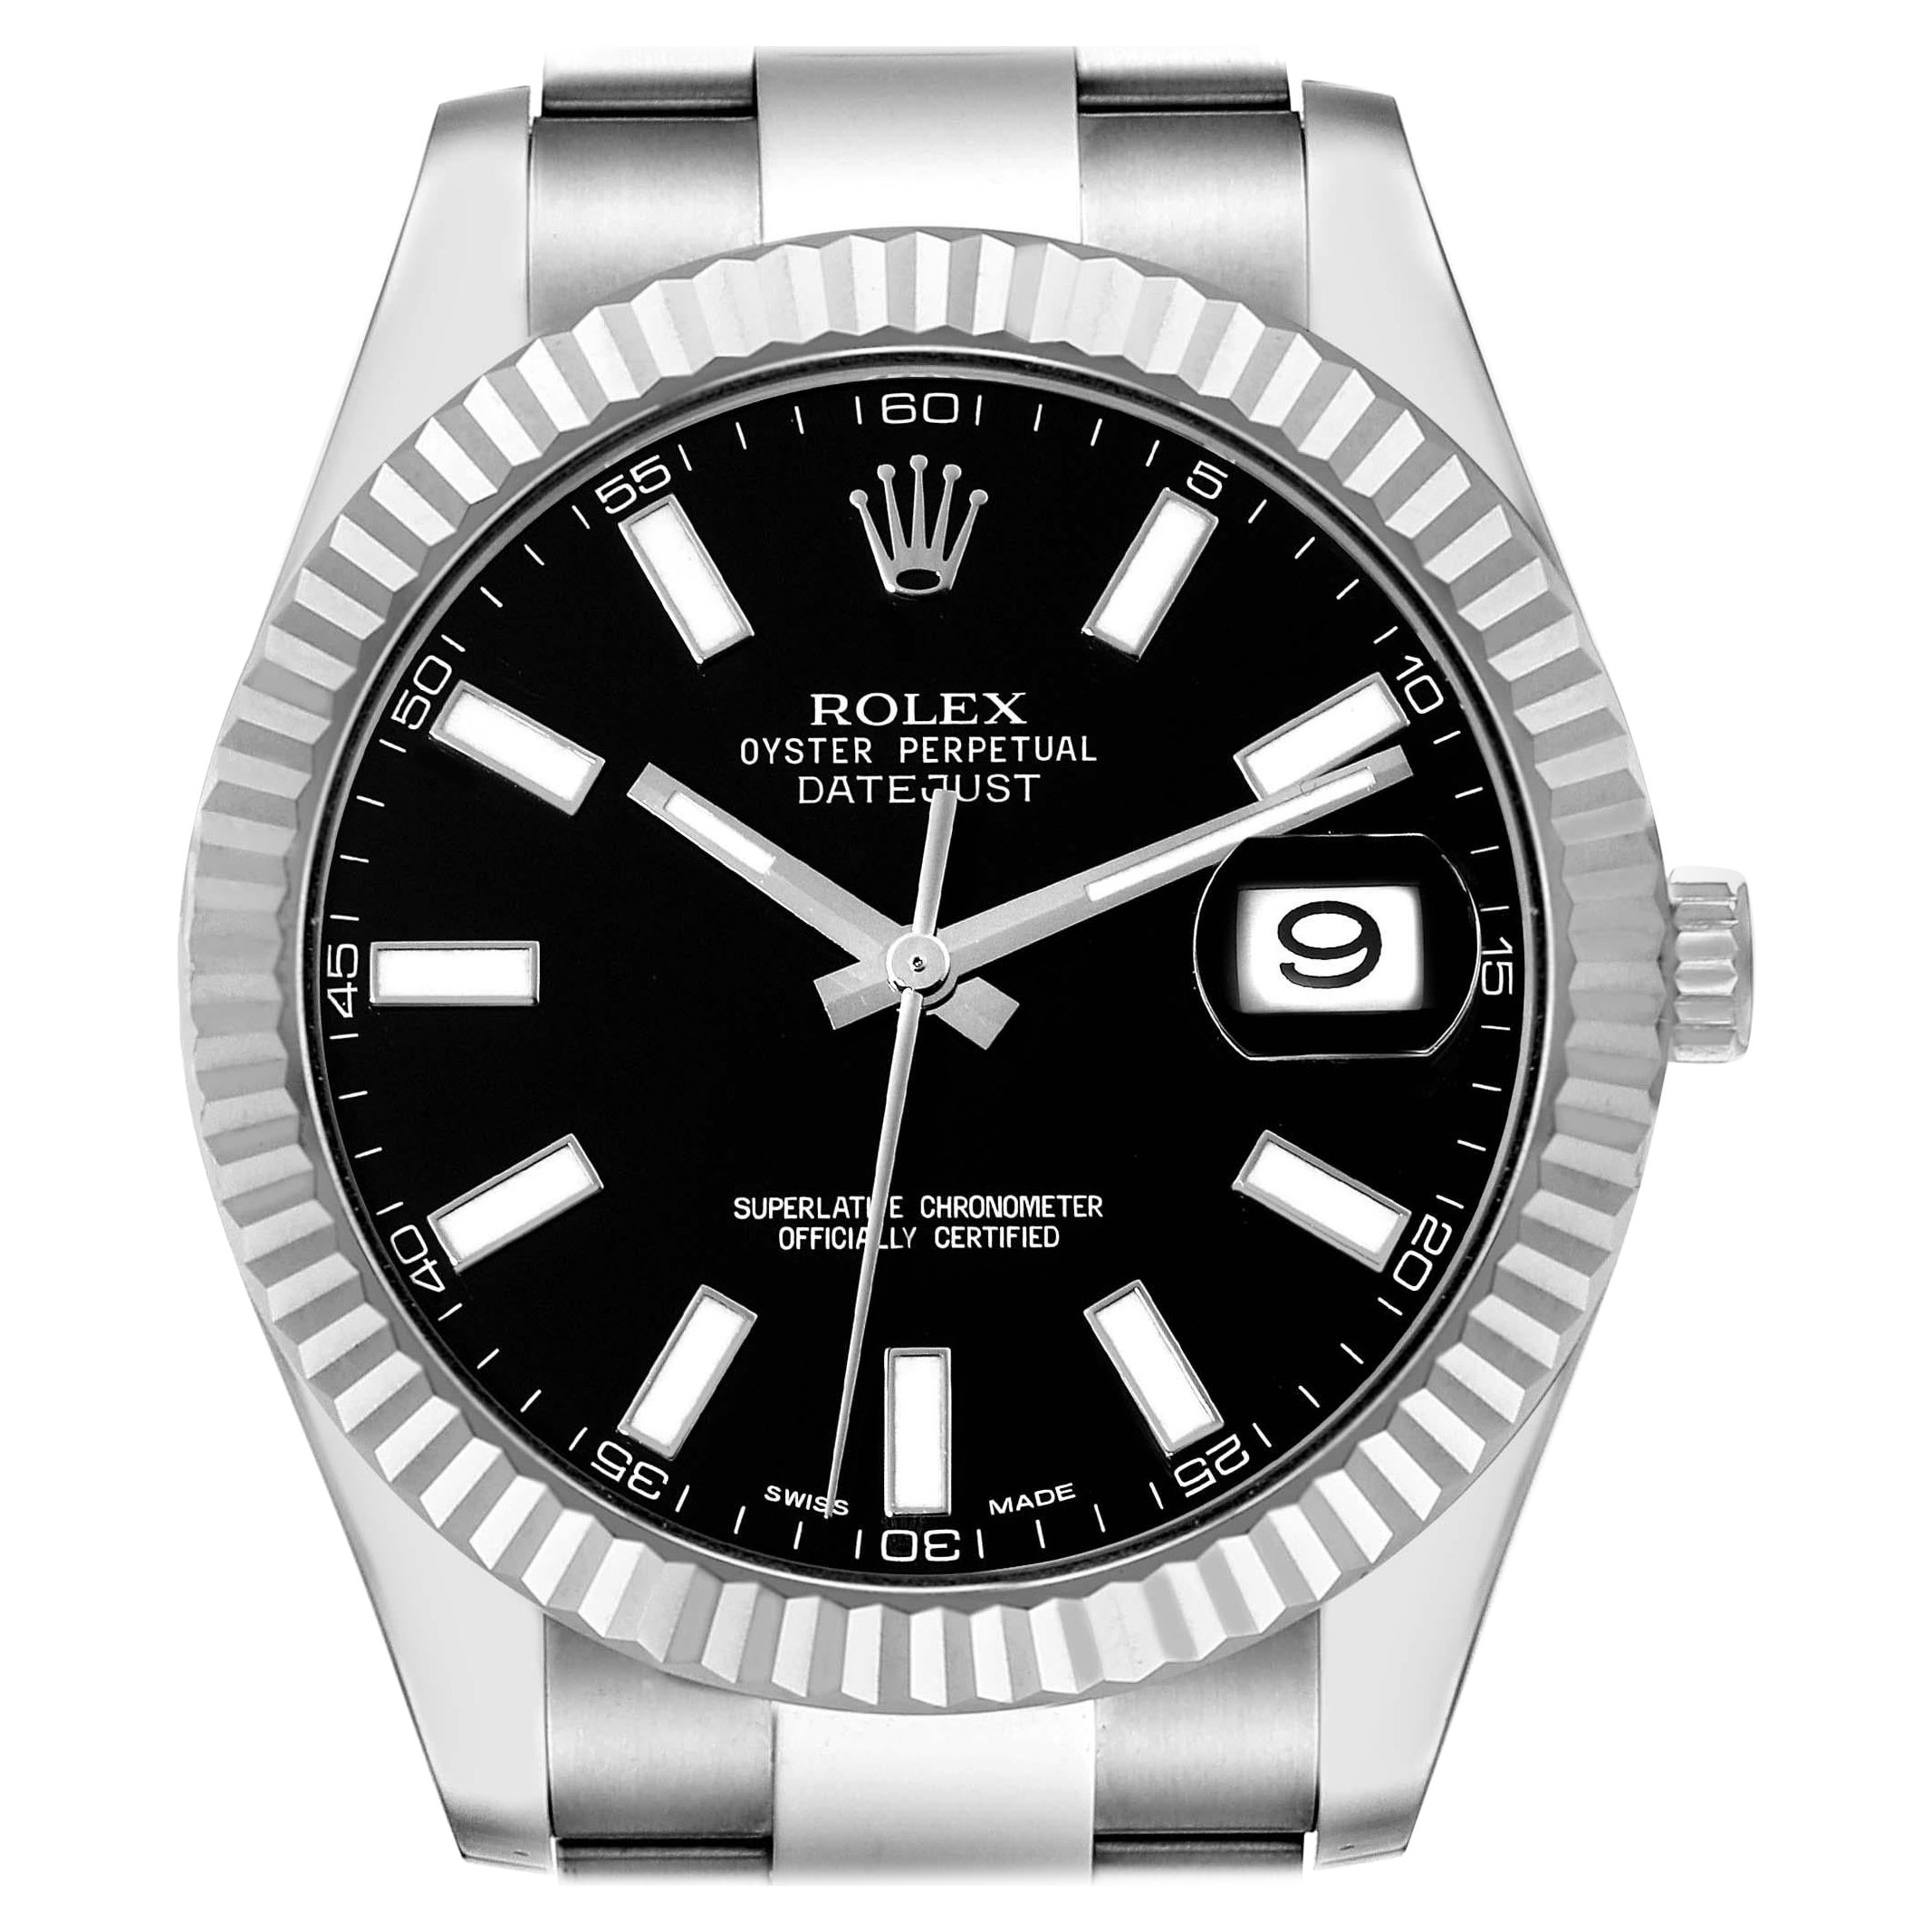 Rolex Datejust II 41mm Steel White Gold Black Dial Mens Watch 116334 For Sale